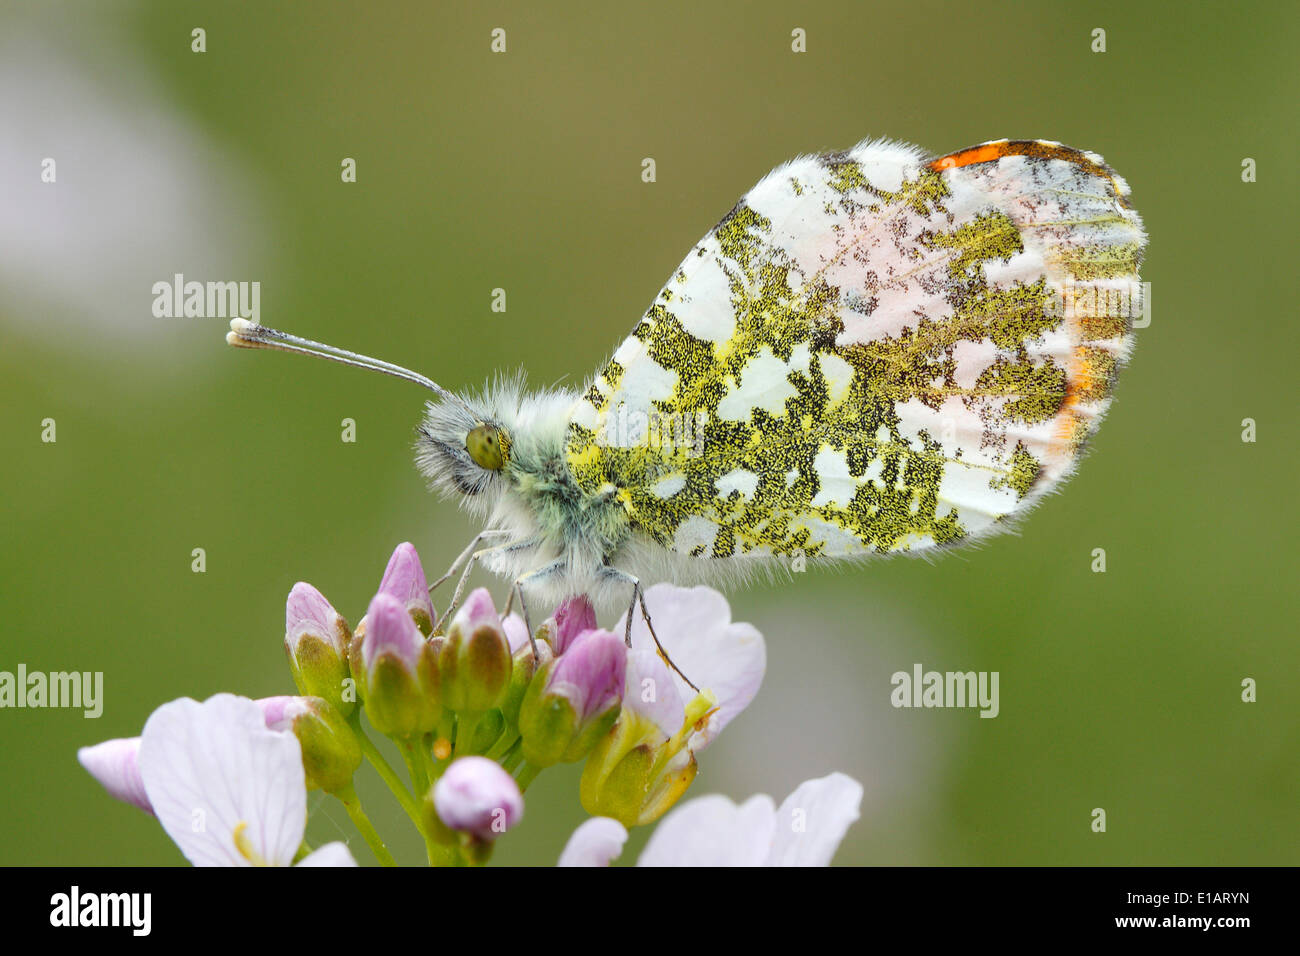 Orange Tip Butterfly (Anthocharis cardamines), male on a flower of the Cuckoo Flower or Lady's Smock (Cardamine pratensis) Stock Photo